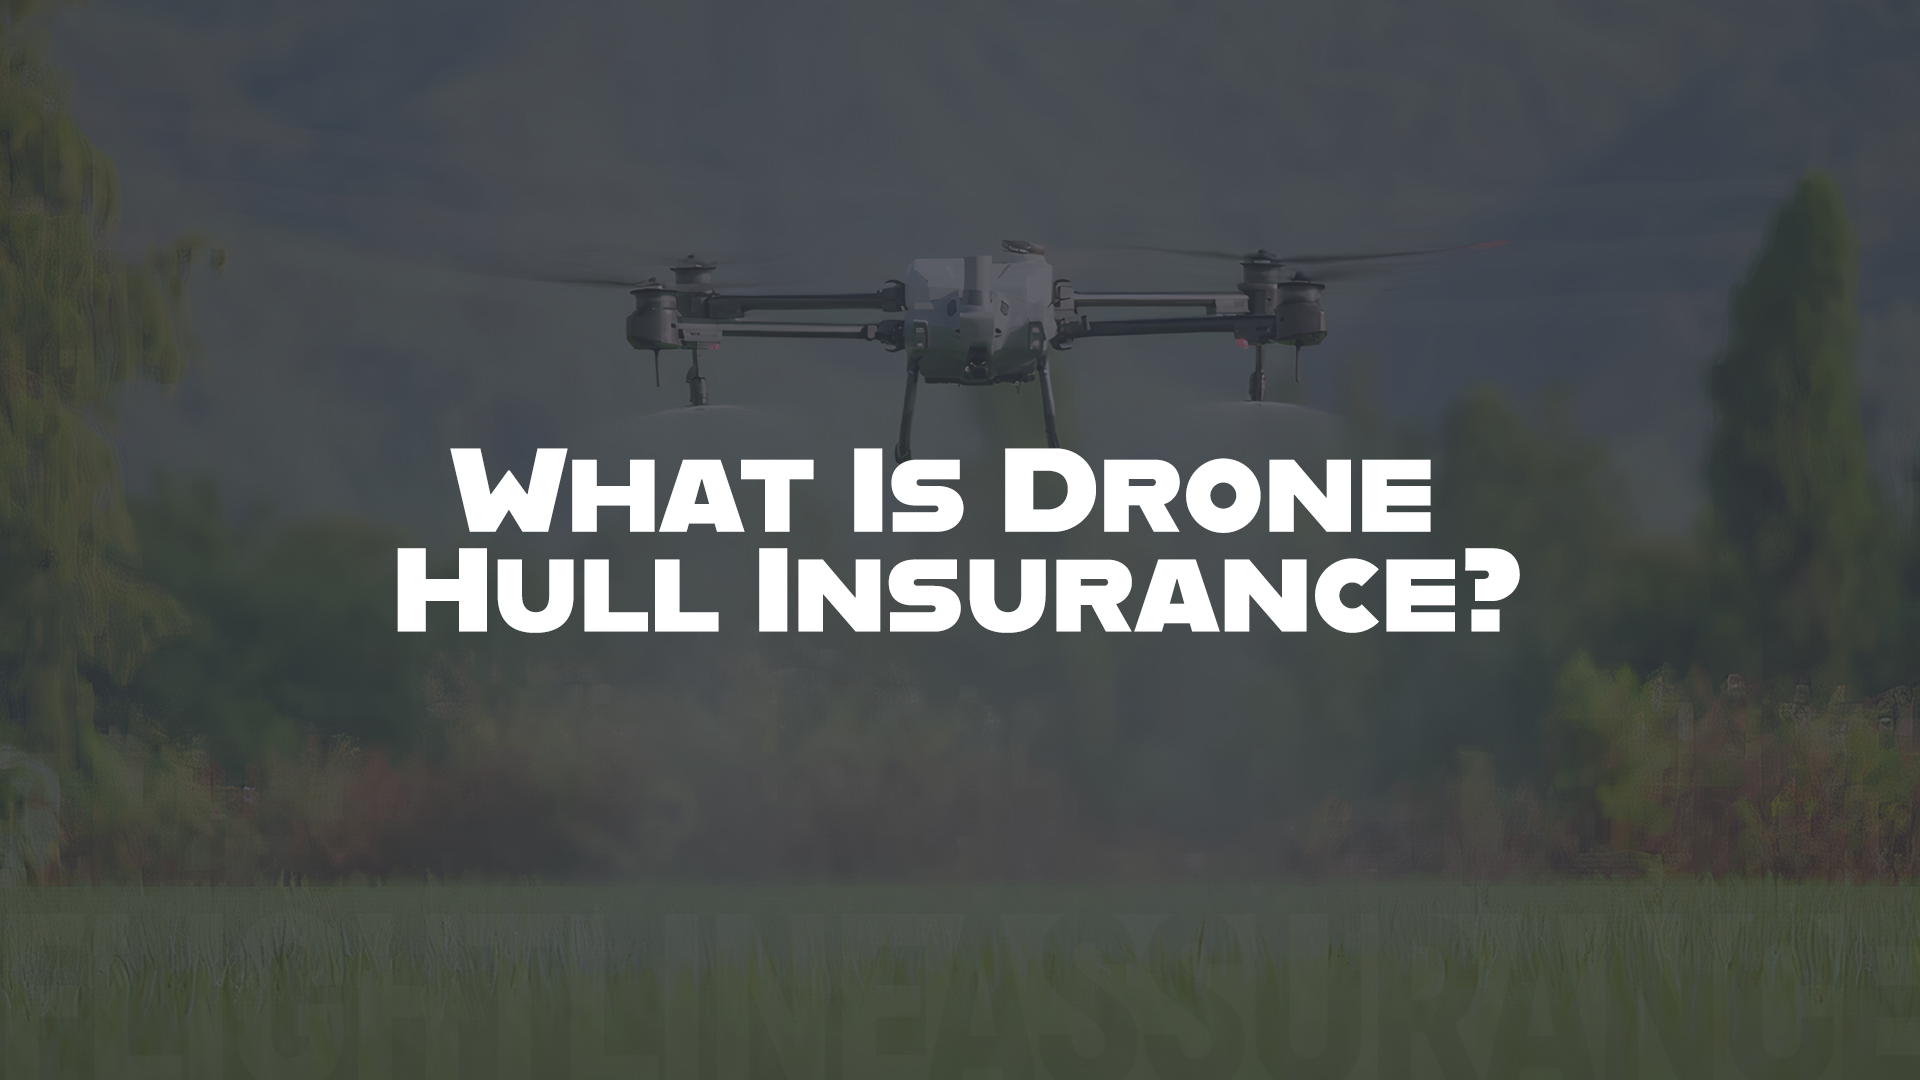 A drone flying over a green field with the text 'What Is Drone Hull Insurance?' superimposed